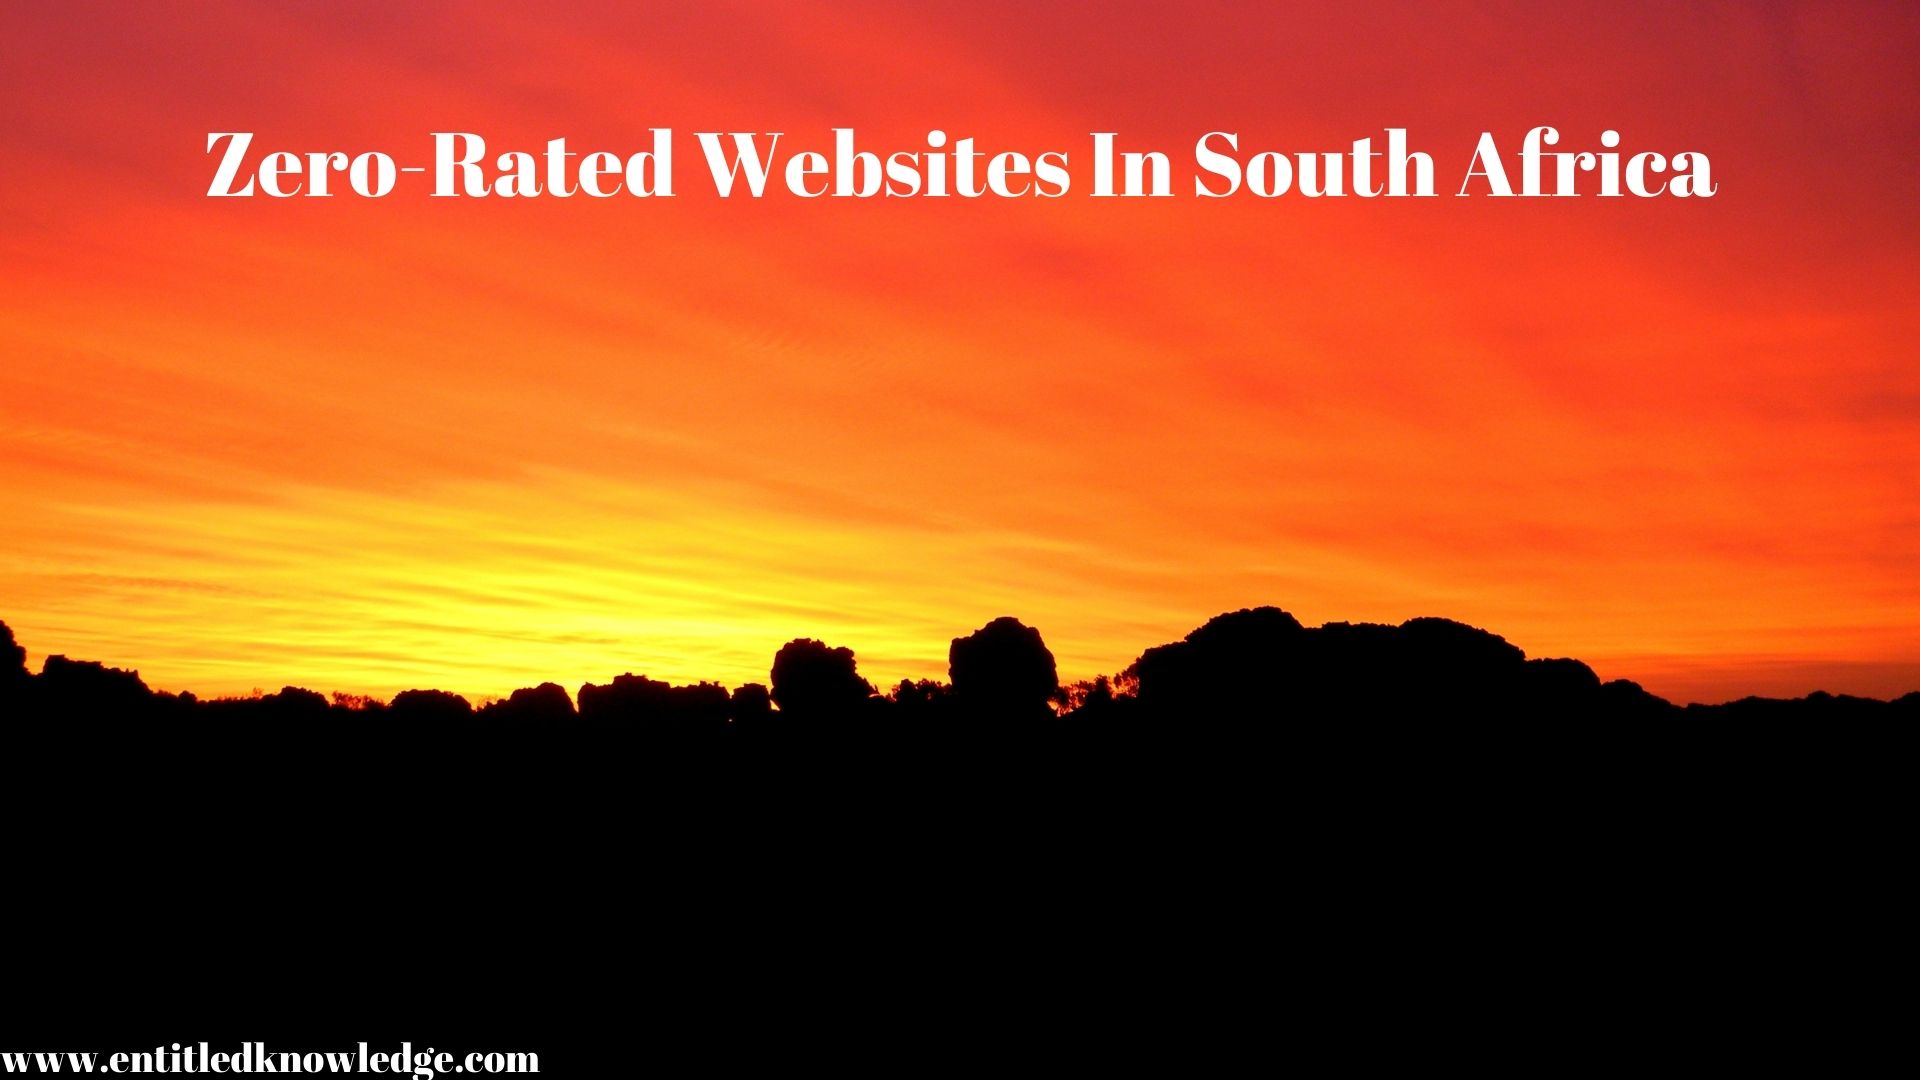 Zero-Rated Websites In South Africa